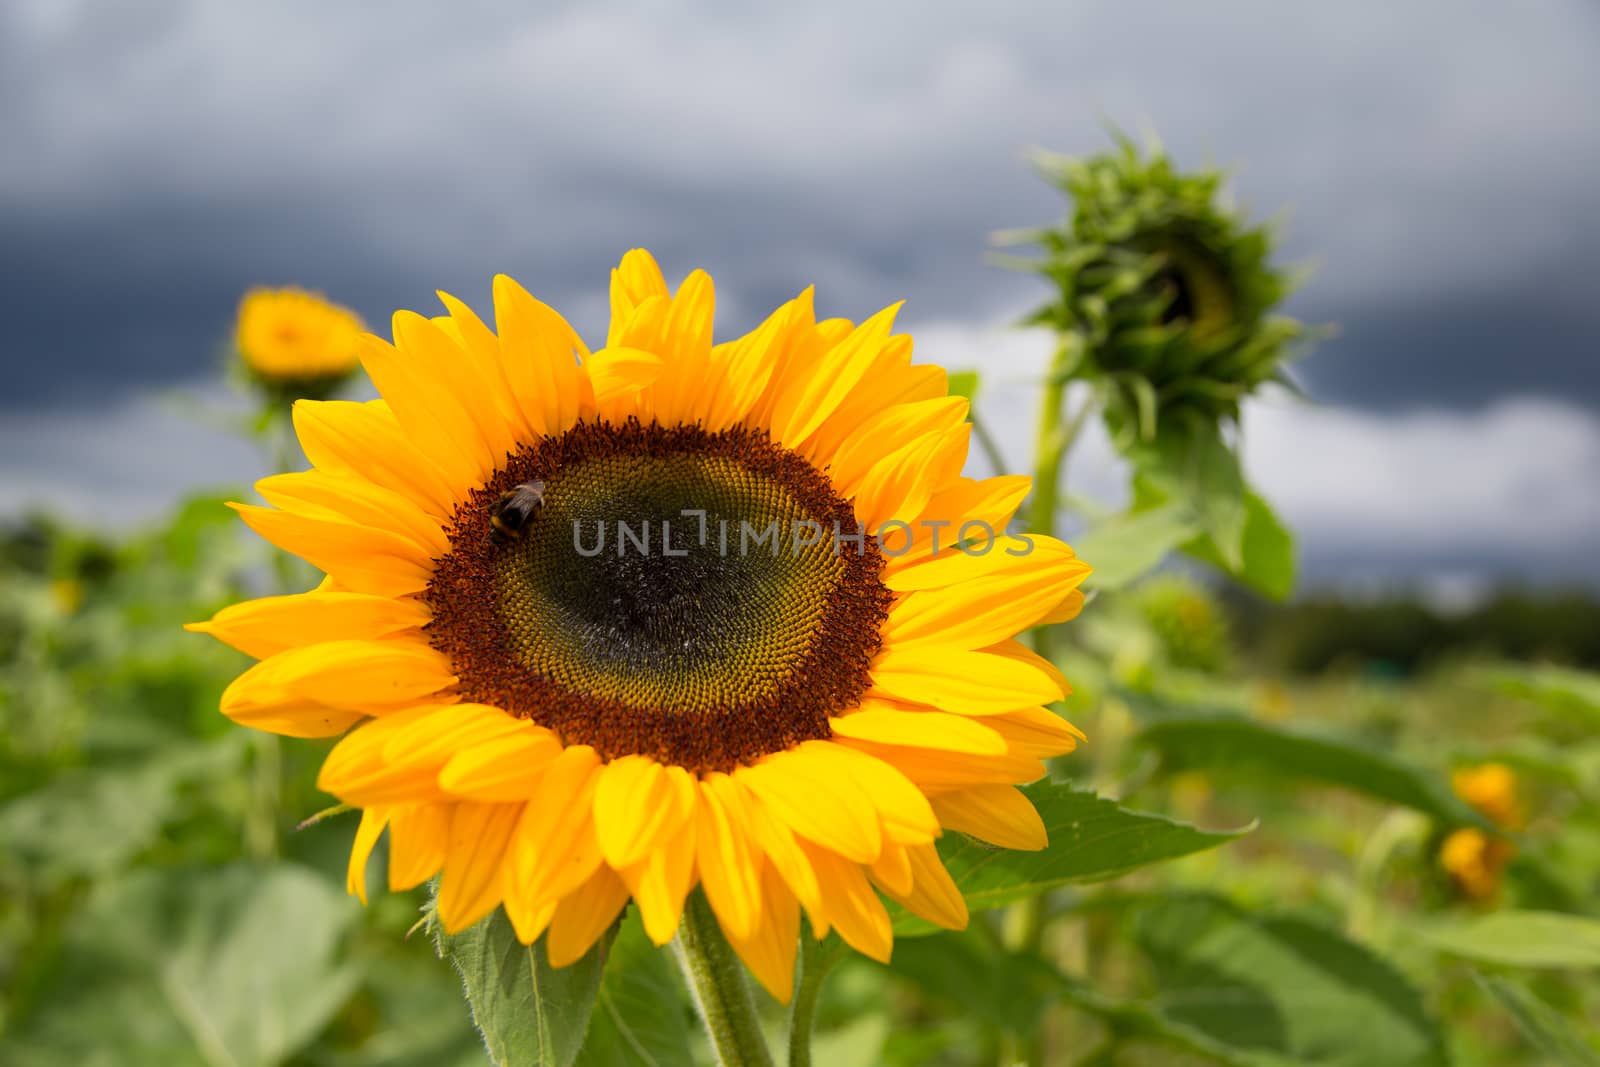 a big sunflower in a park